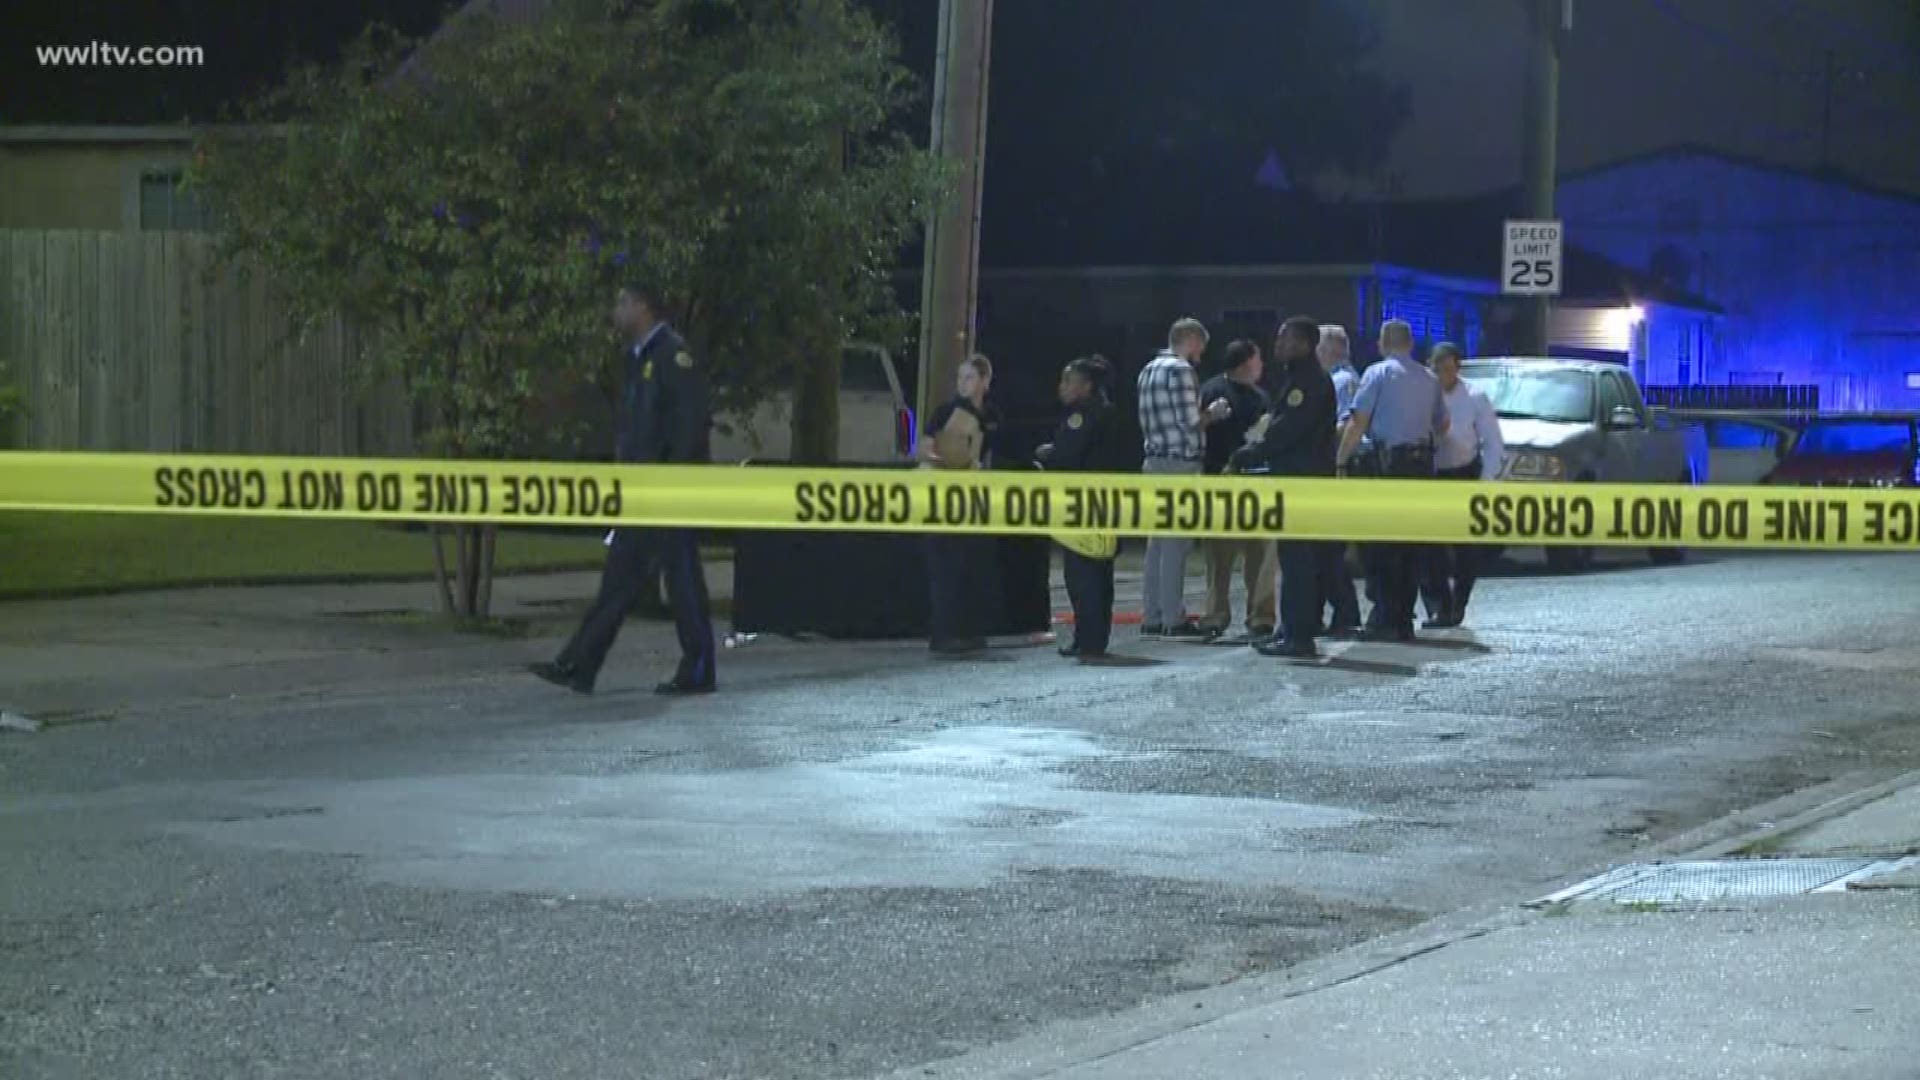 A local rap artist was shot and killed outside of an Elysian Fields Waffle House early Monday.